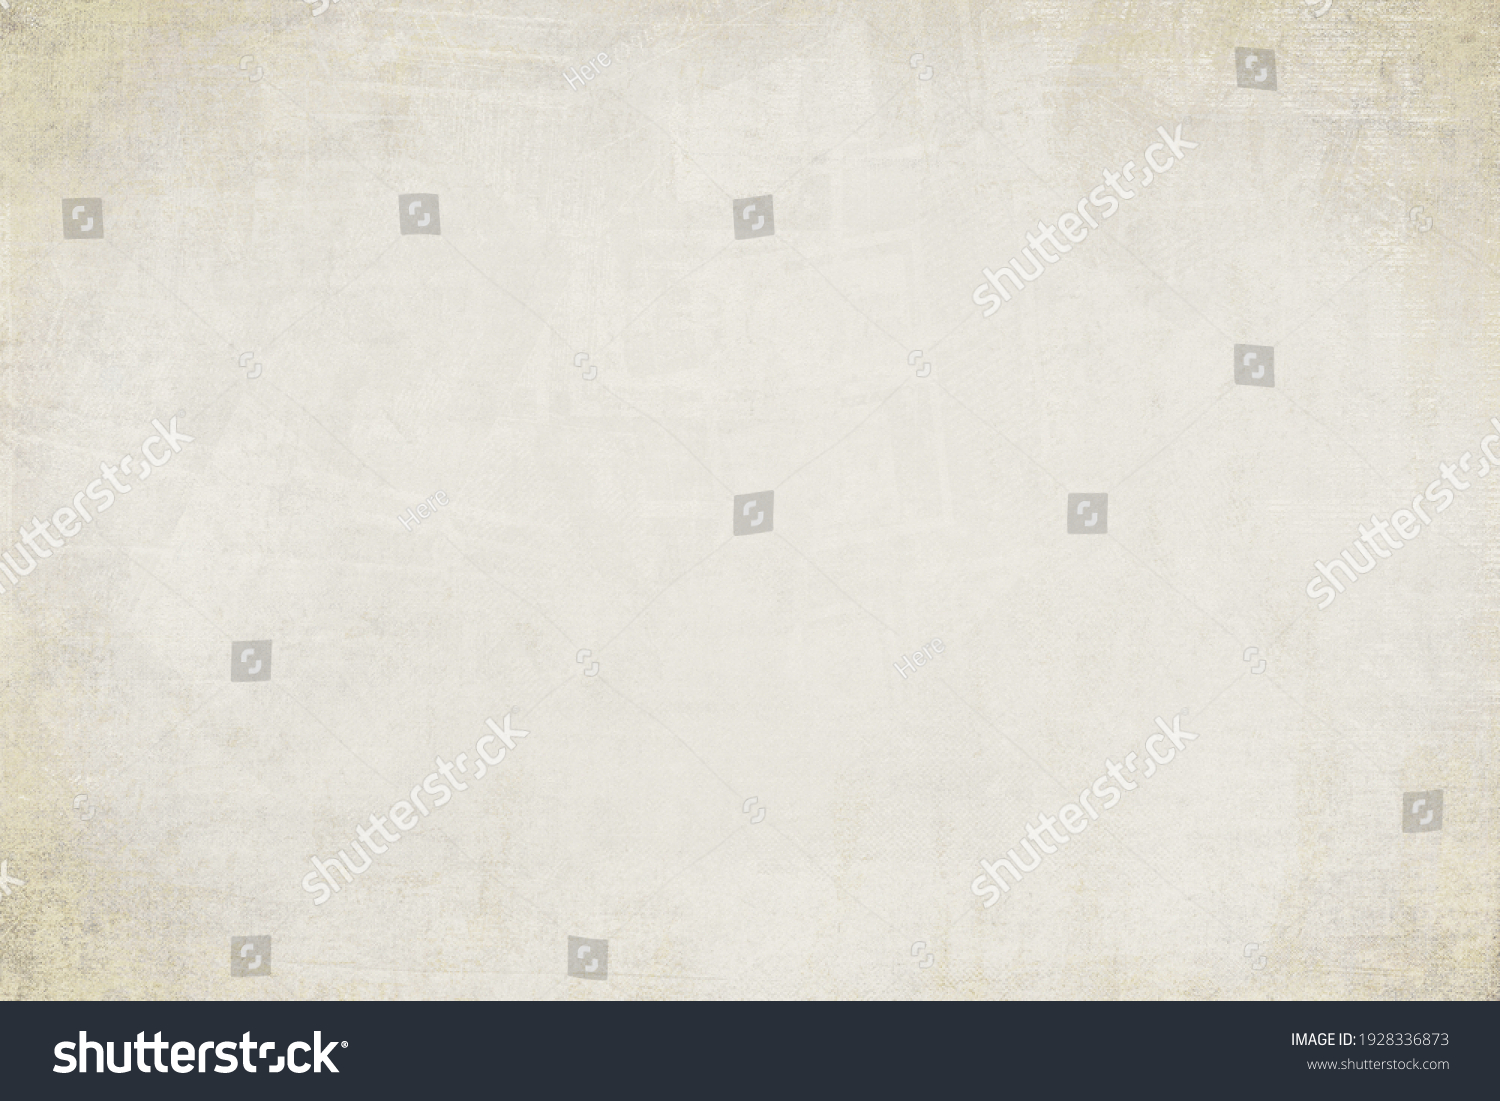 OLD NEWSPAPER BACKGROUND, VINTAGE GREY GRUNGE PAPER TEXTURE, BLANK TEXTURED PATTERN WITH SPACE FOR TEXT #1928336873